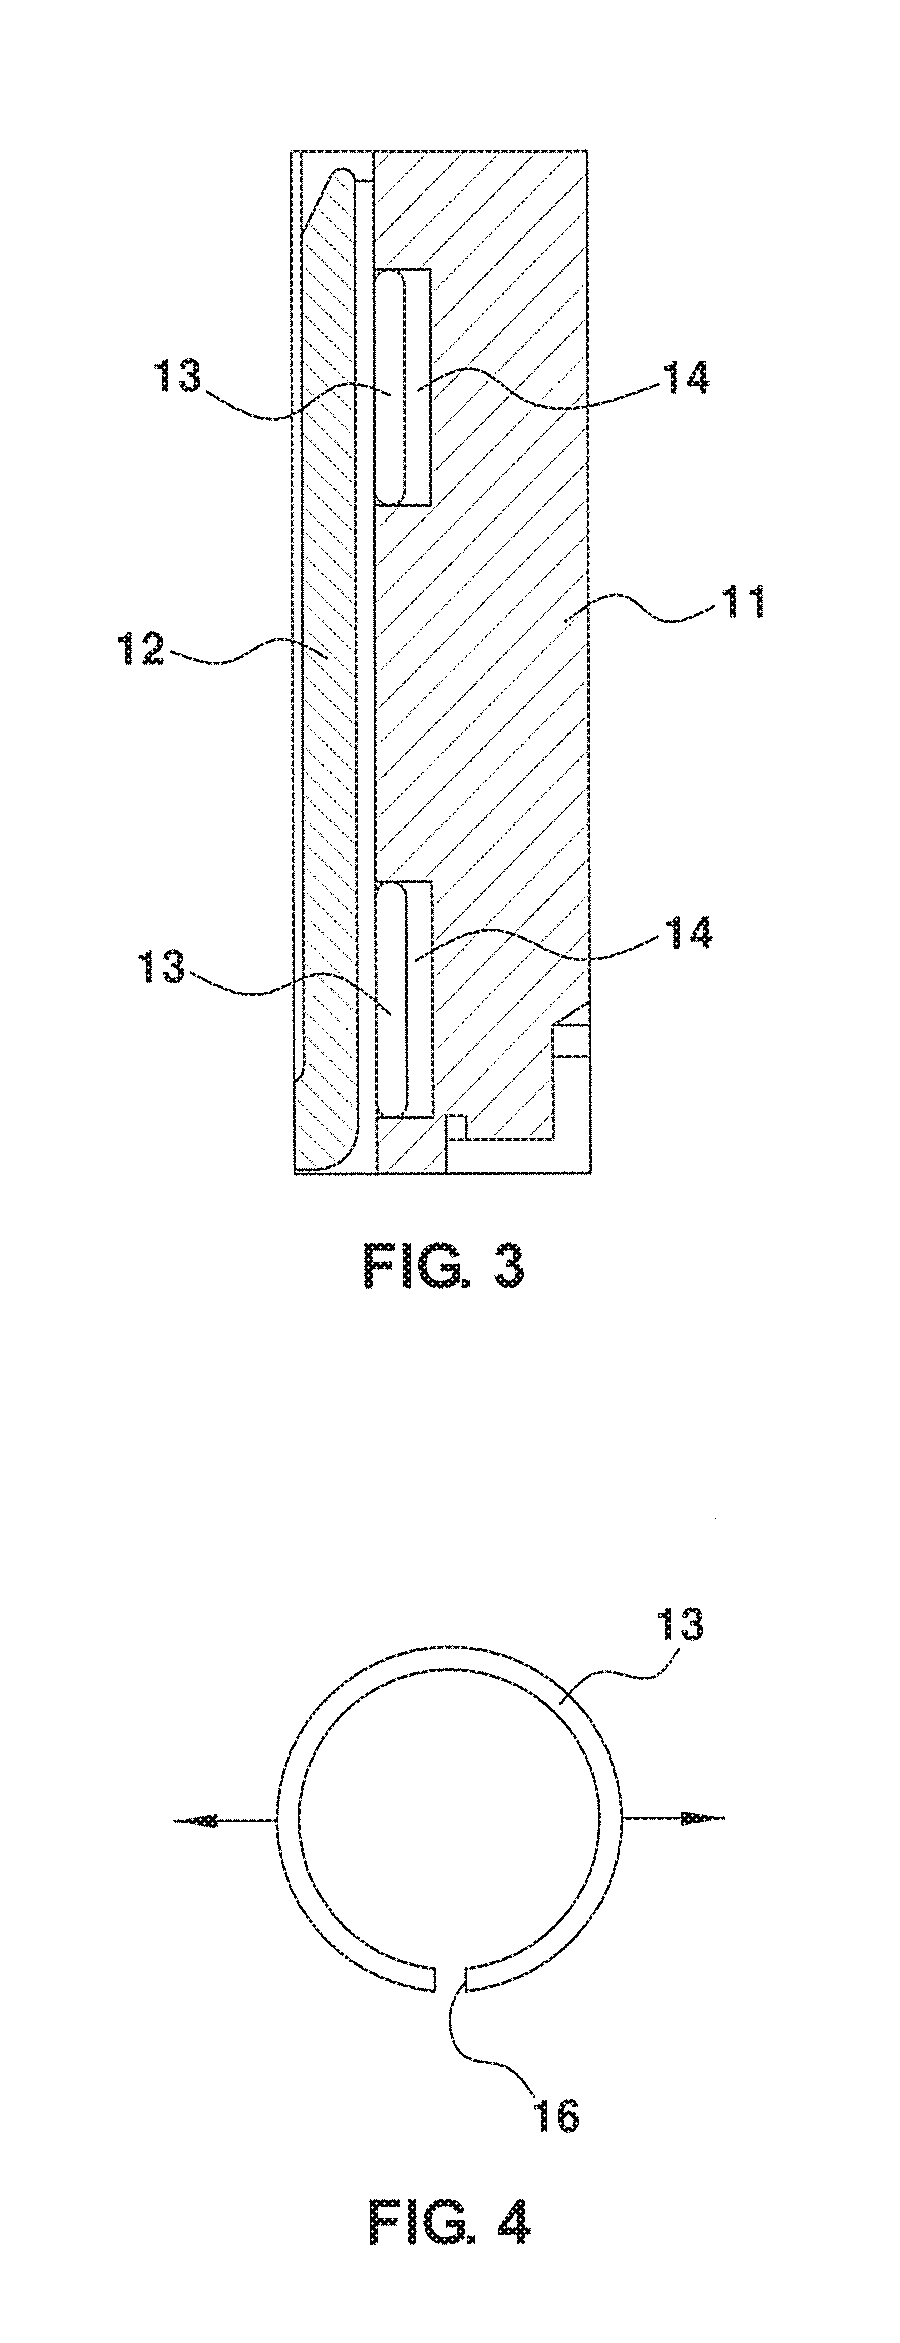 Structure for preventing vibration of solenoid valve